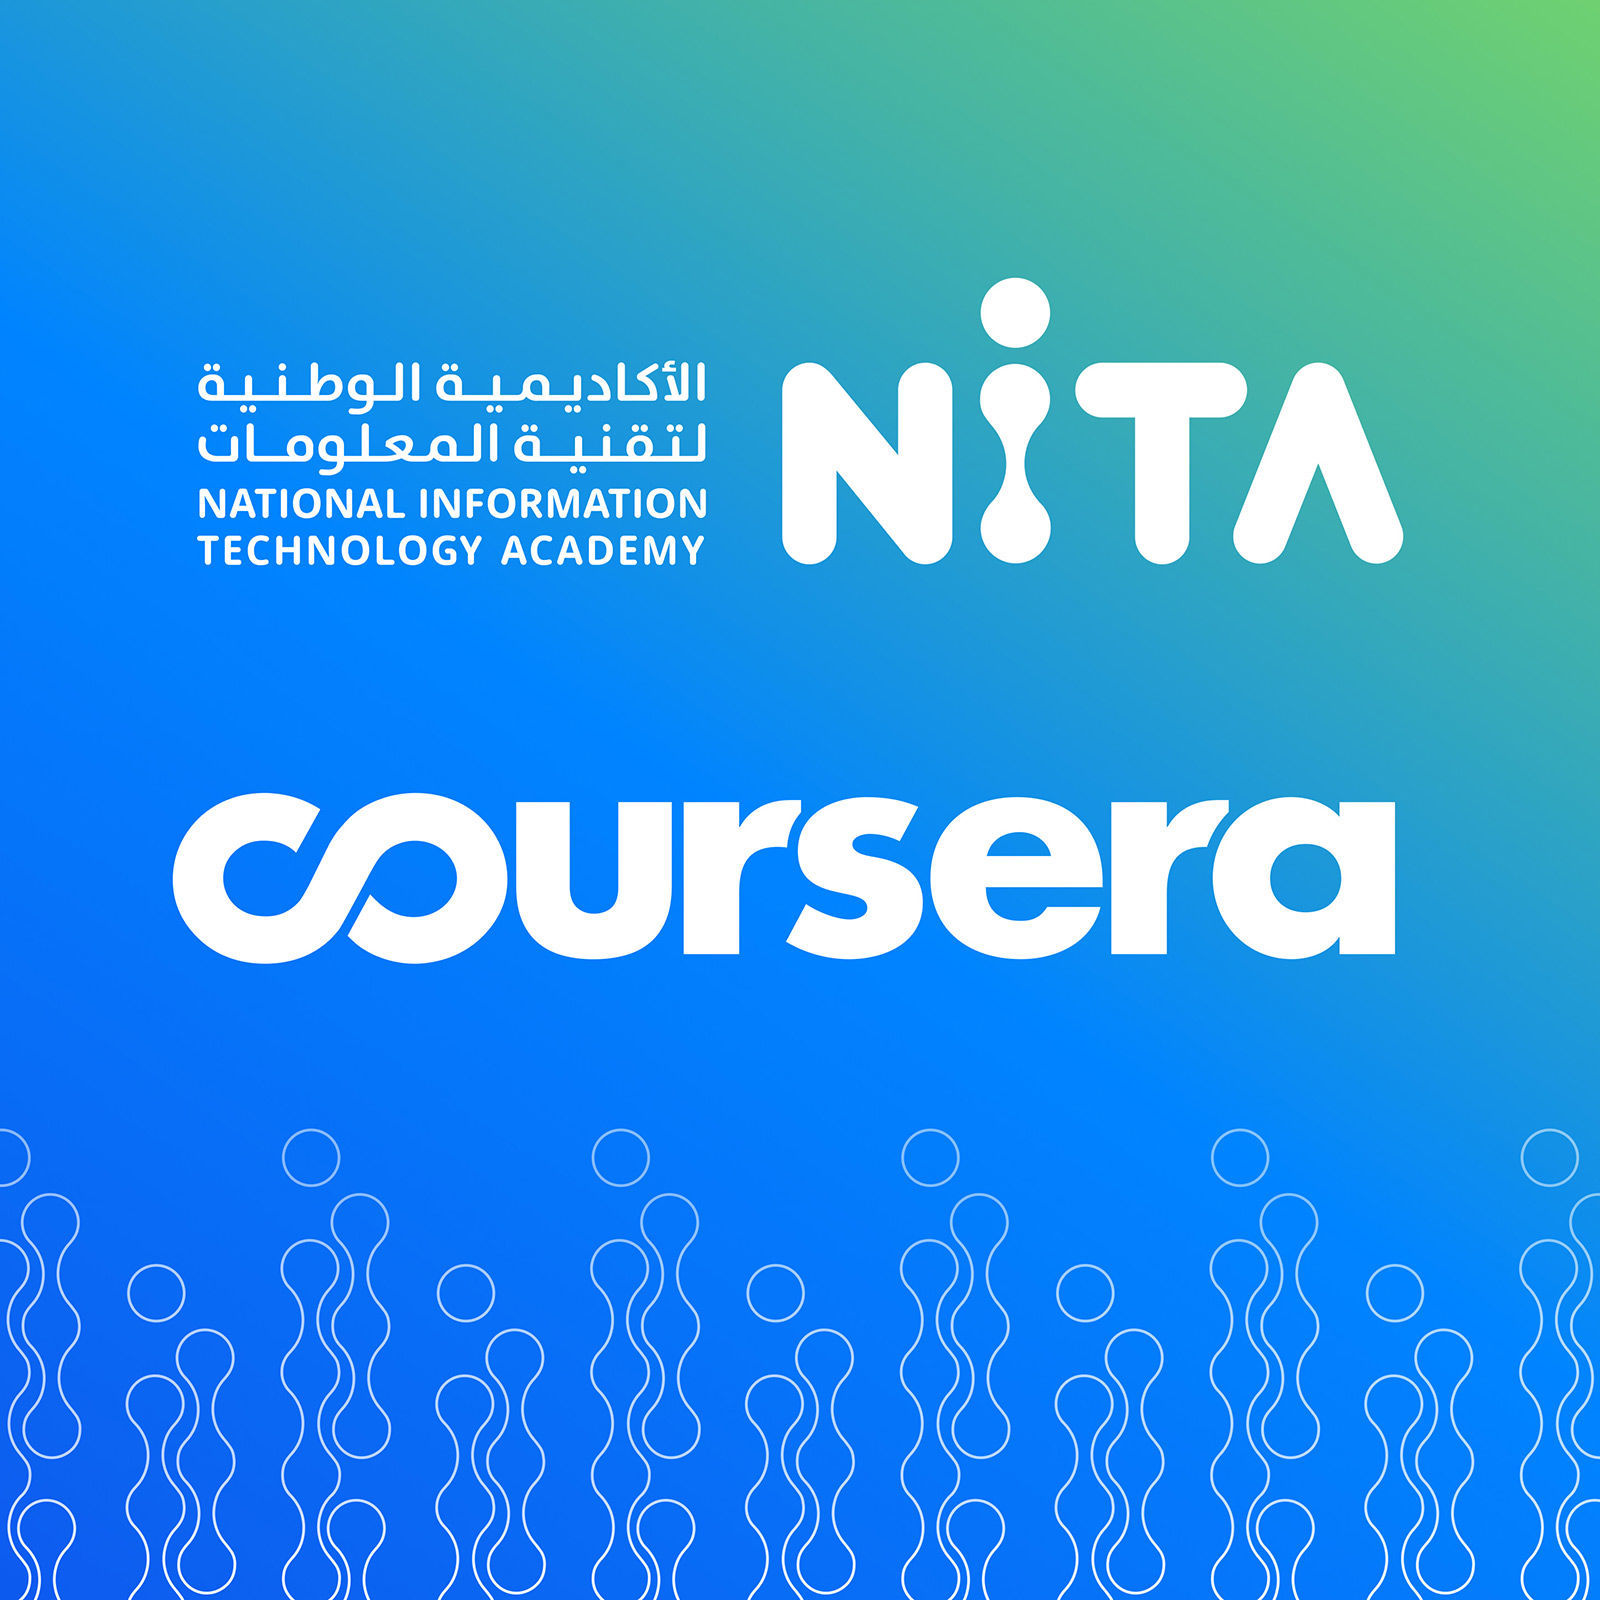 NITA Launches Distance Learning With Course